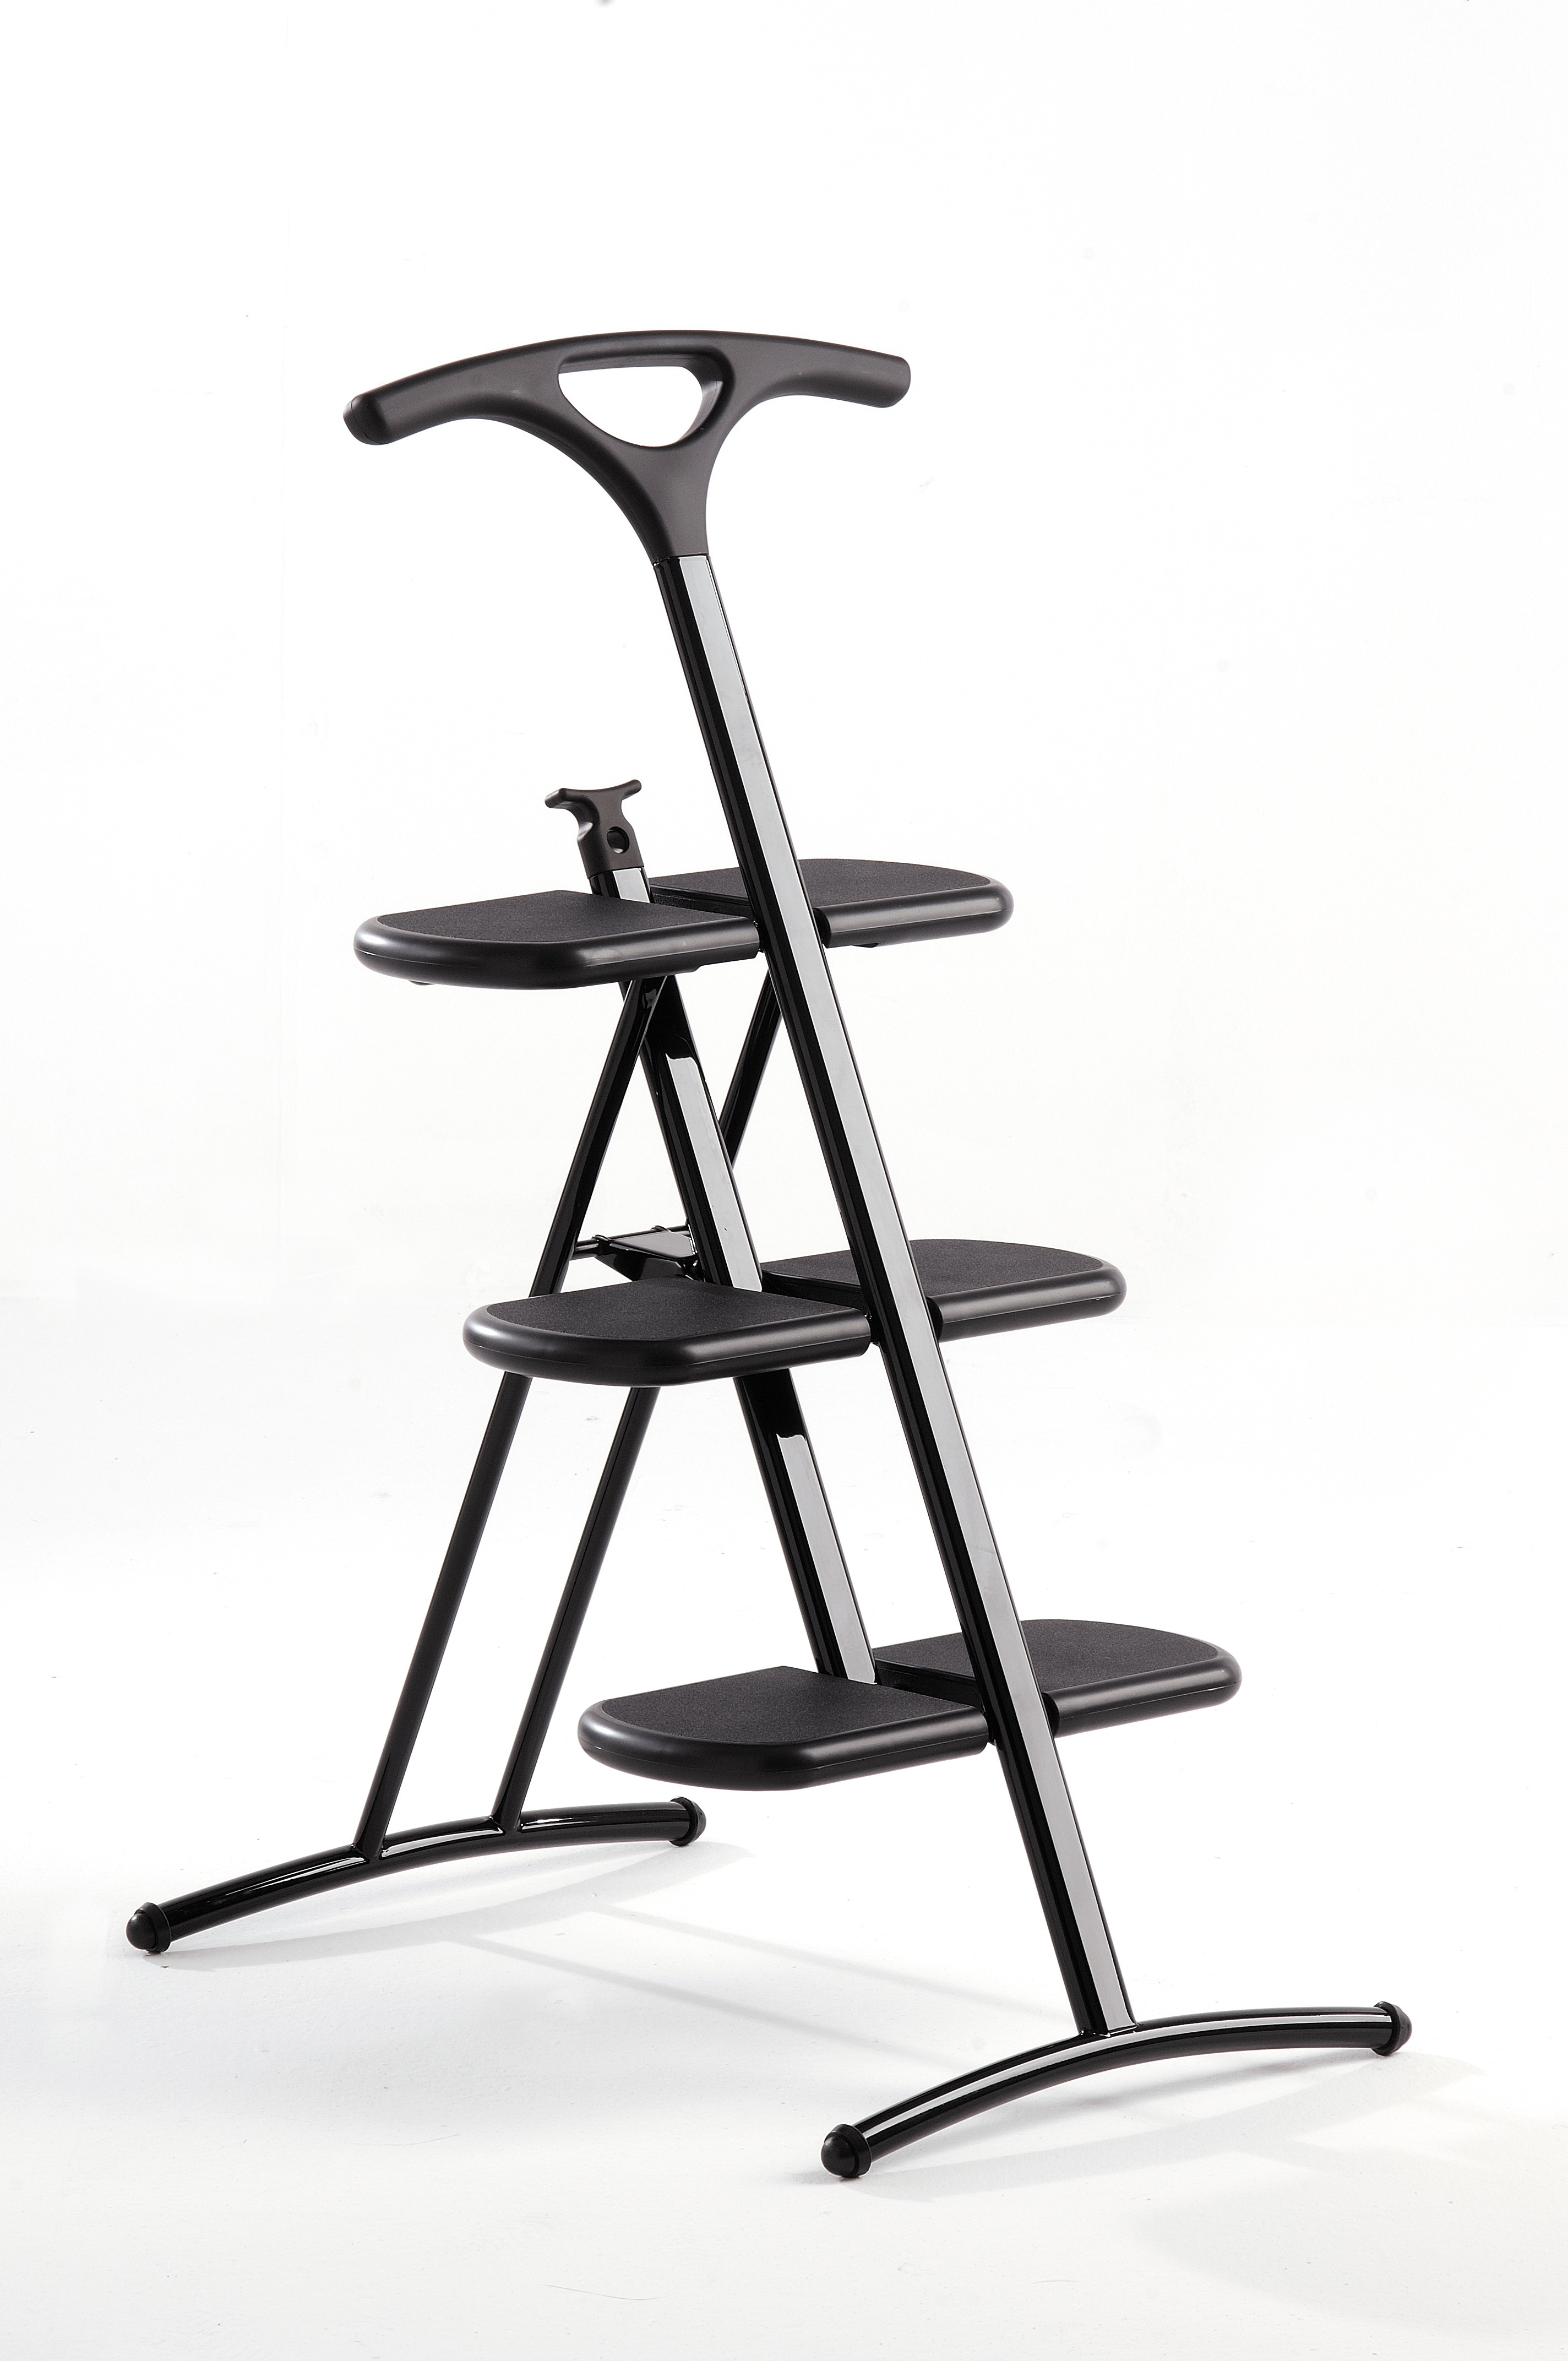 These multi-purpose stands that can be used to hang clothes and store accessories are ideal for small homes